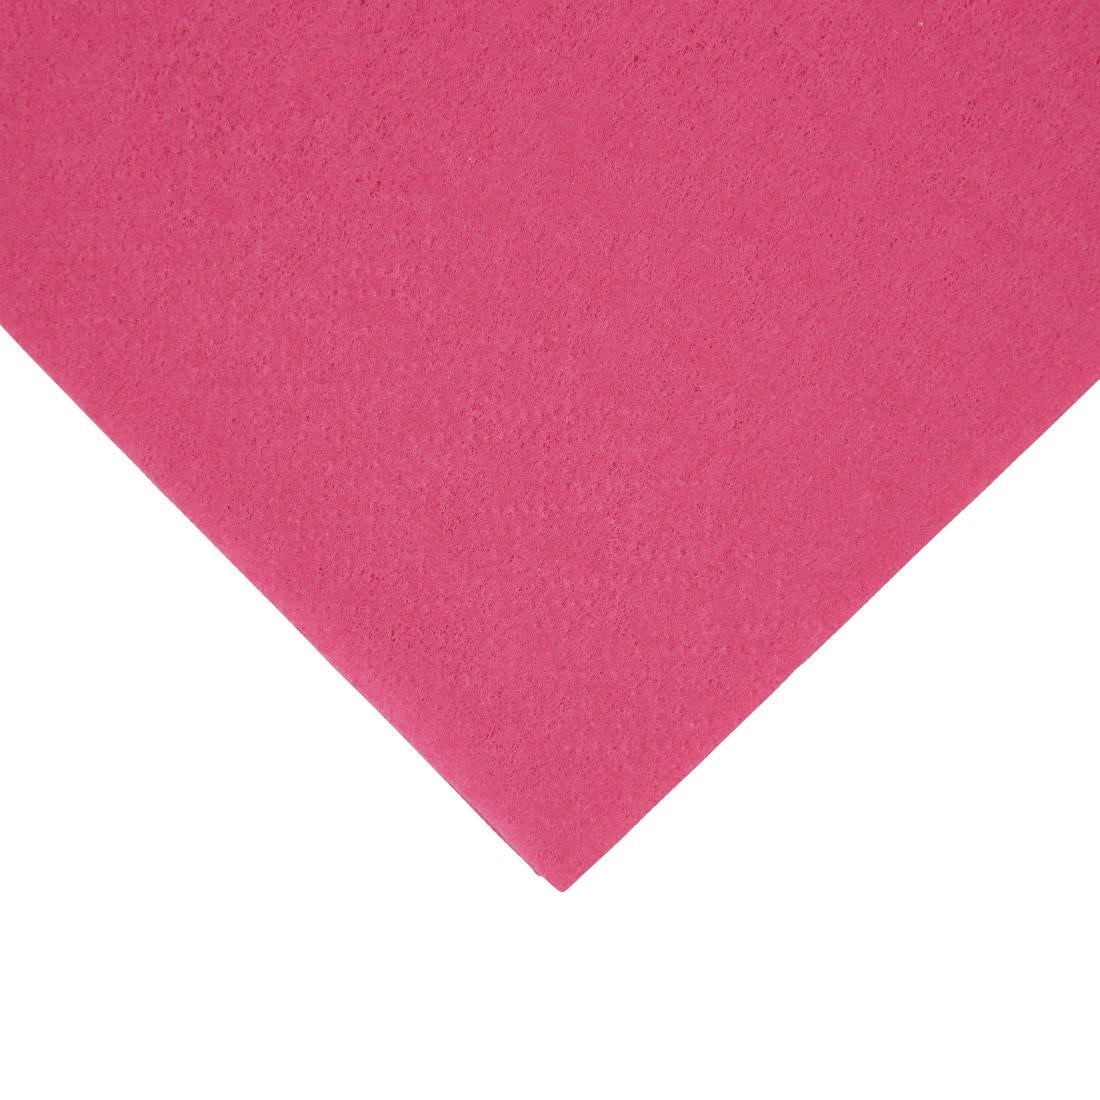 FE230 Fiesta Lunch Napkins Deep Pink 330mm (Pack of 2000) JD Catering Equipment Solutions Ltd